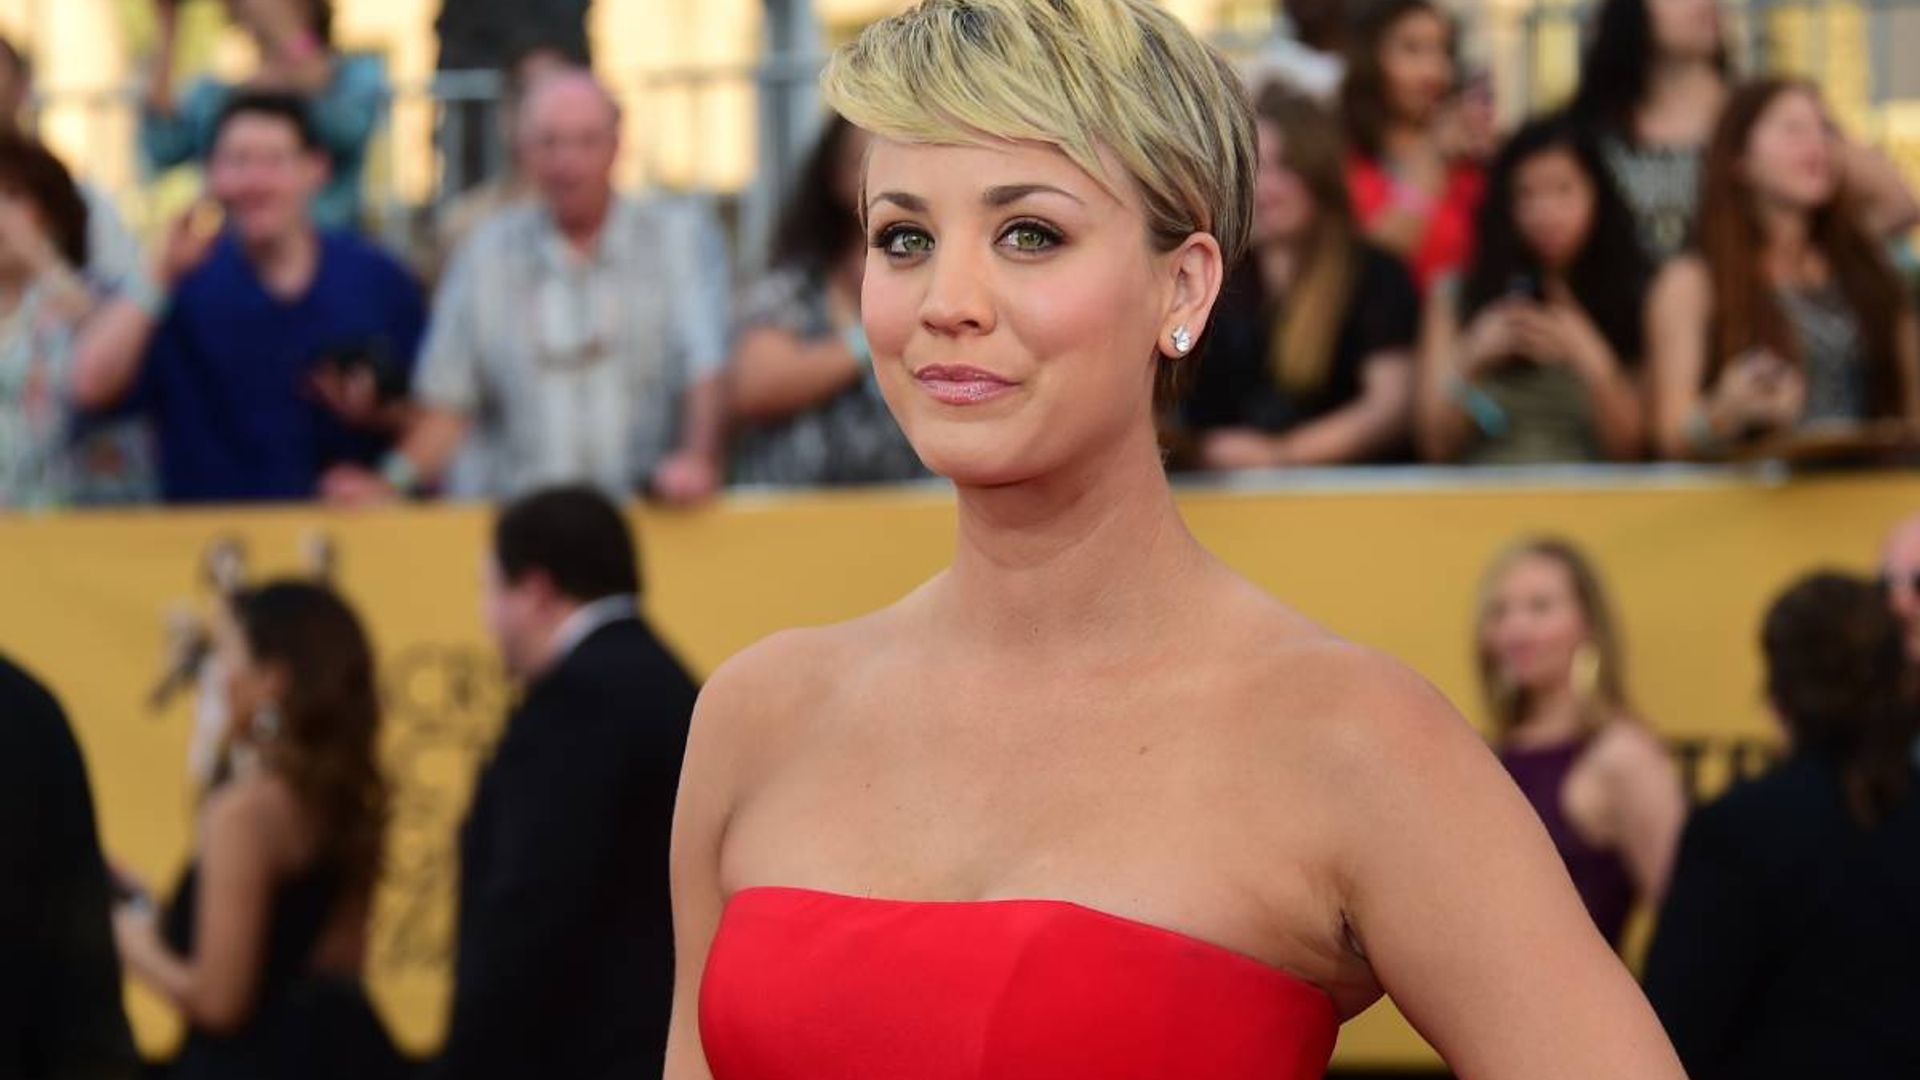 Kaley Cuoco’s new eye-catching look will leave you feeling unsettled